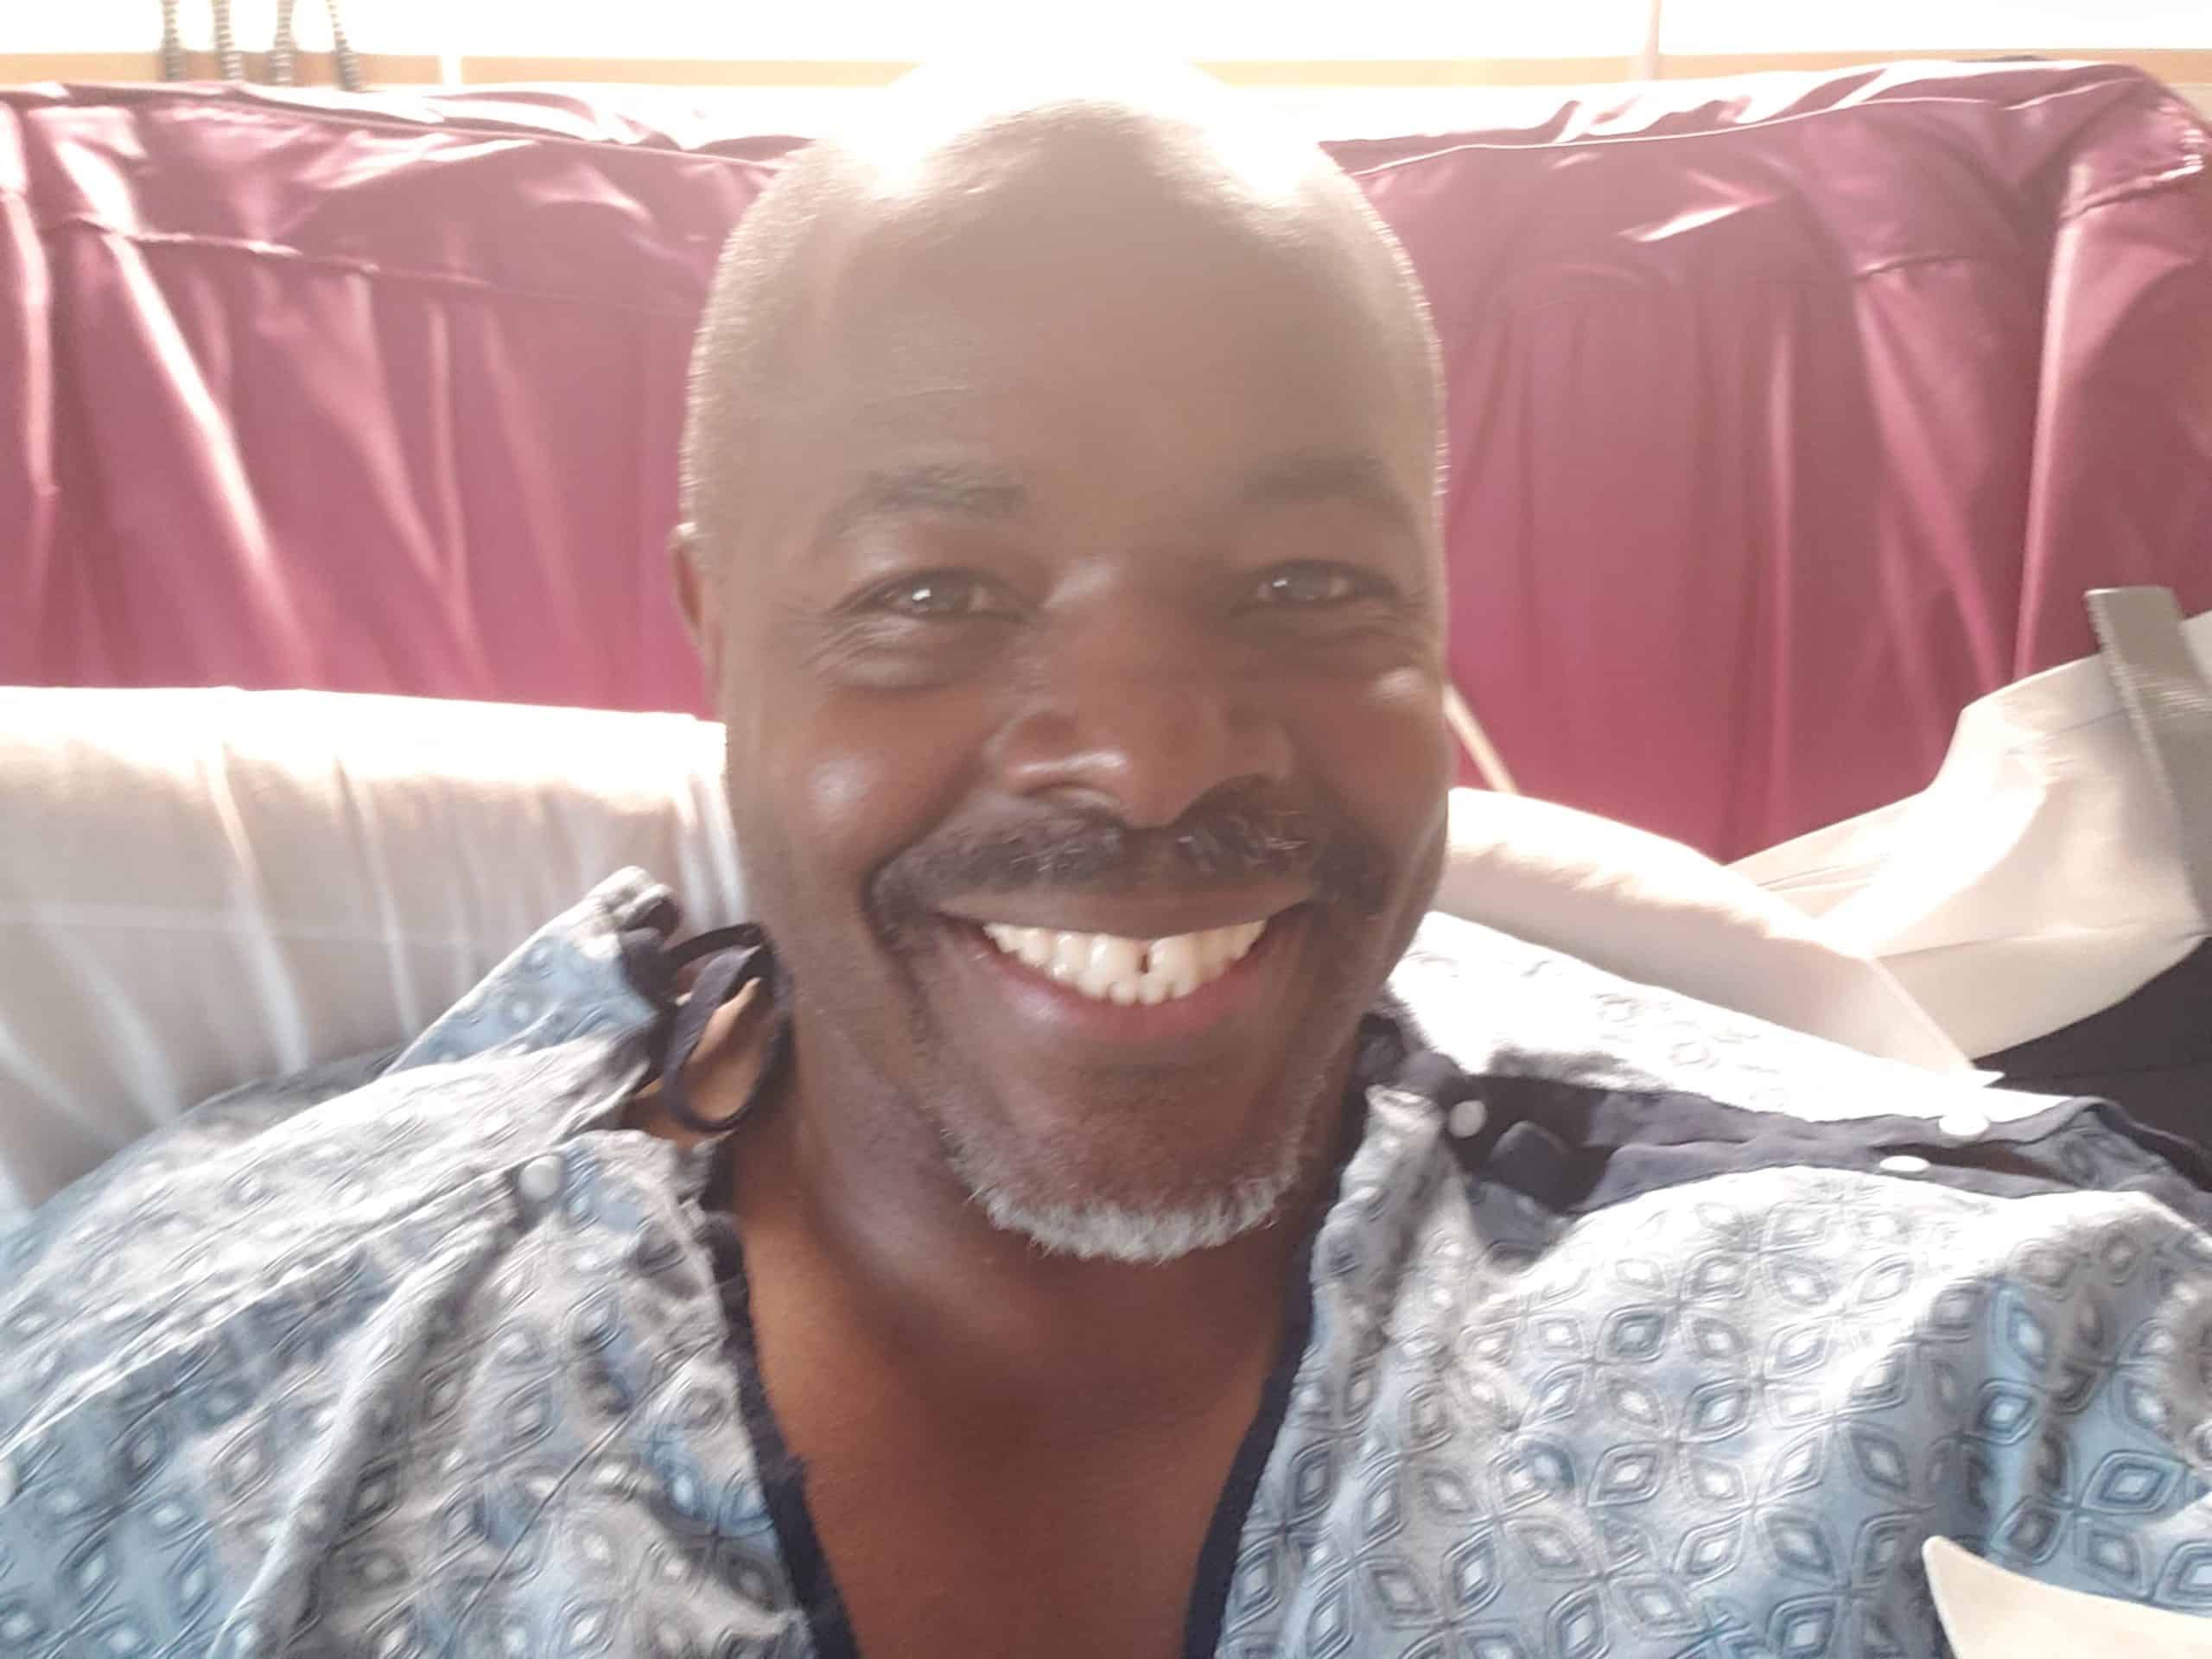 Xavier Smith Pulmonary Embolism me smiling in the Hospital